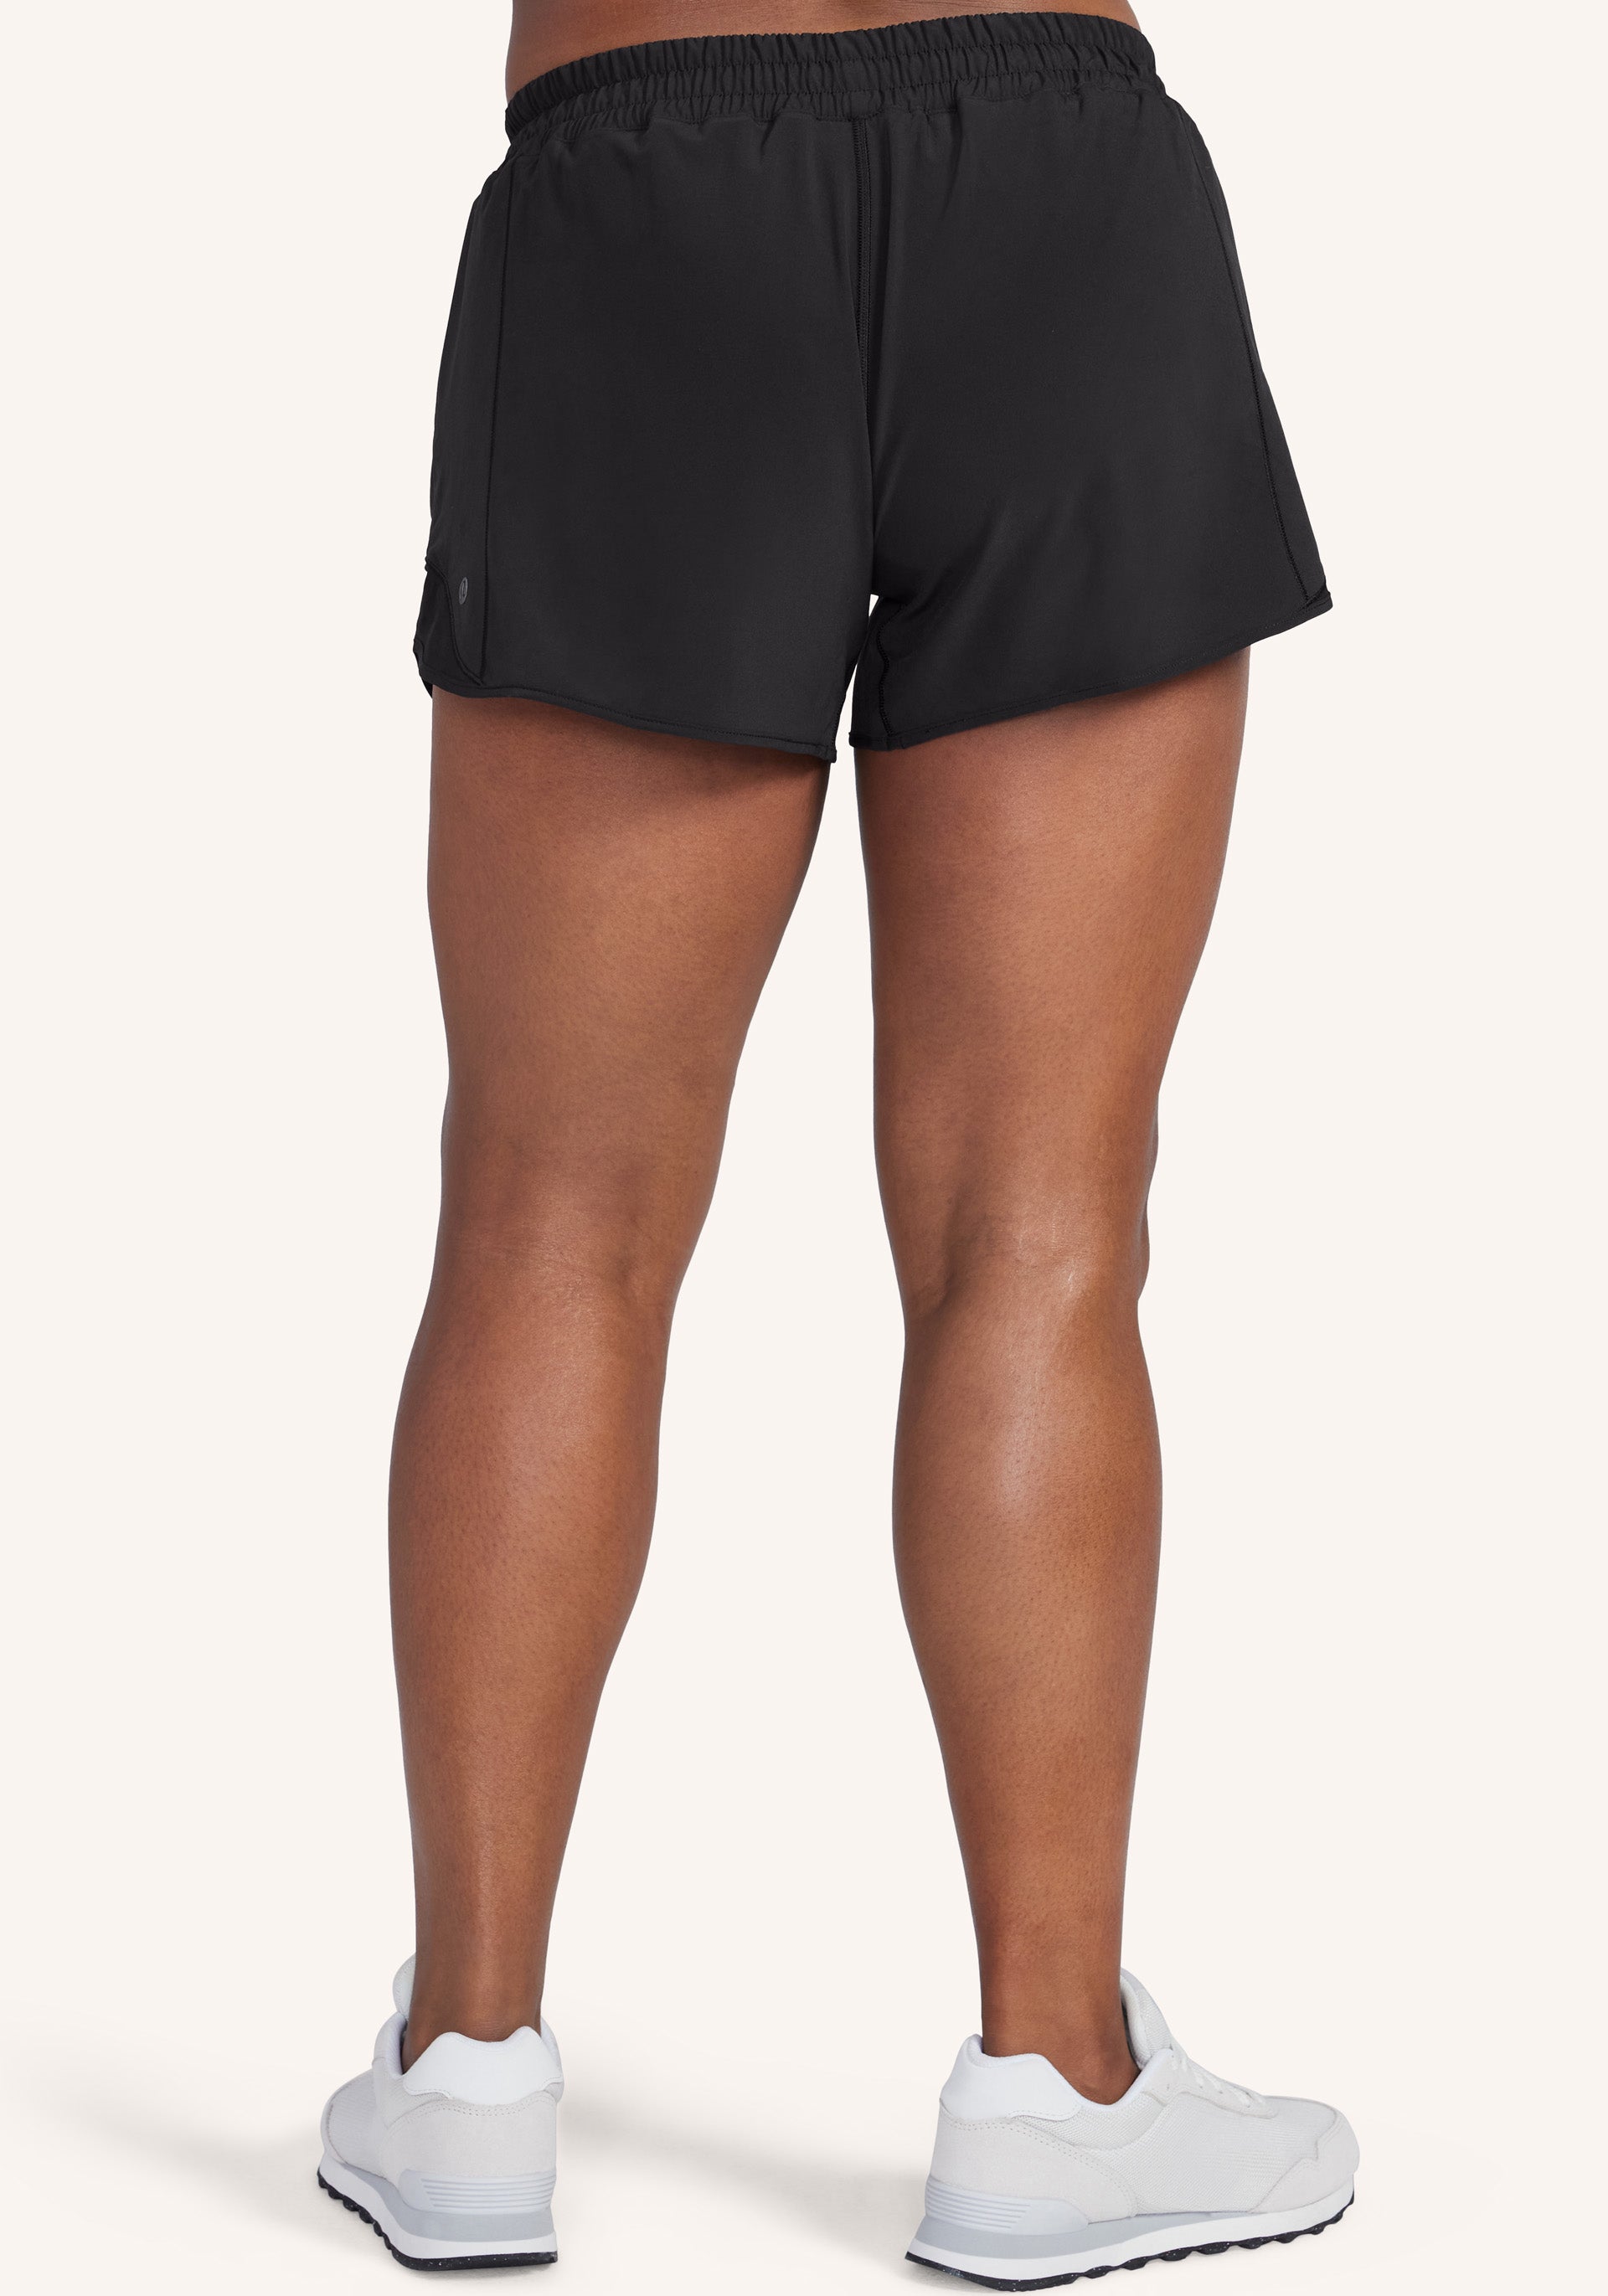 Hotty Hot Low-Rise Lined Short 4, Women's Shorts